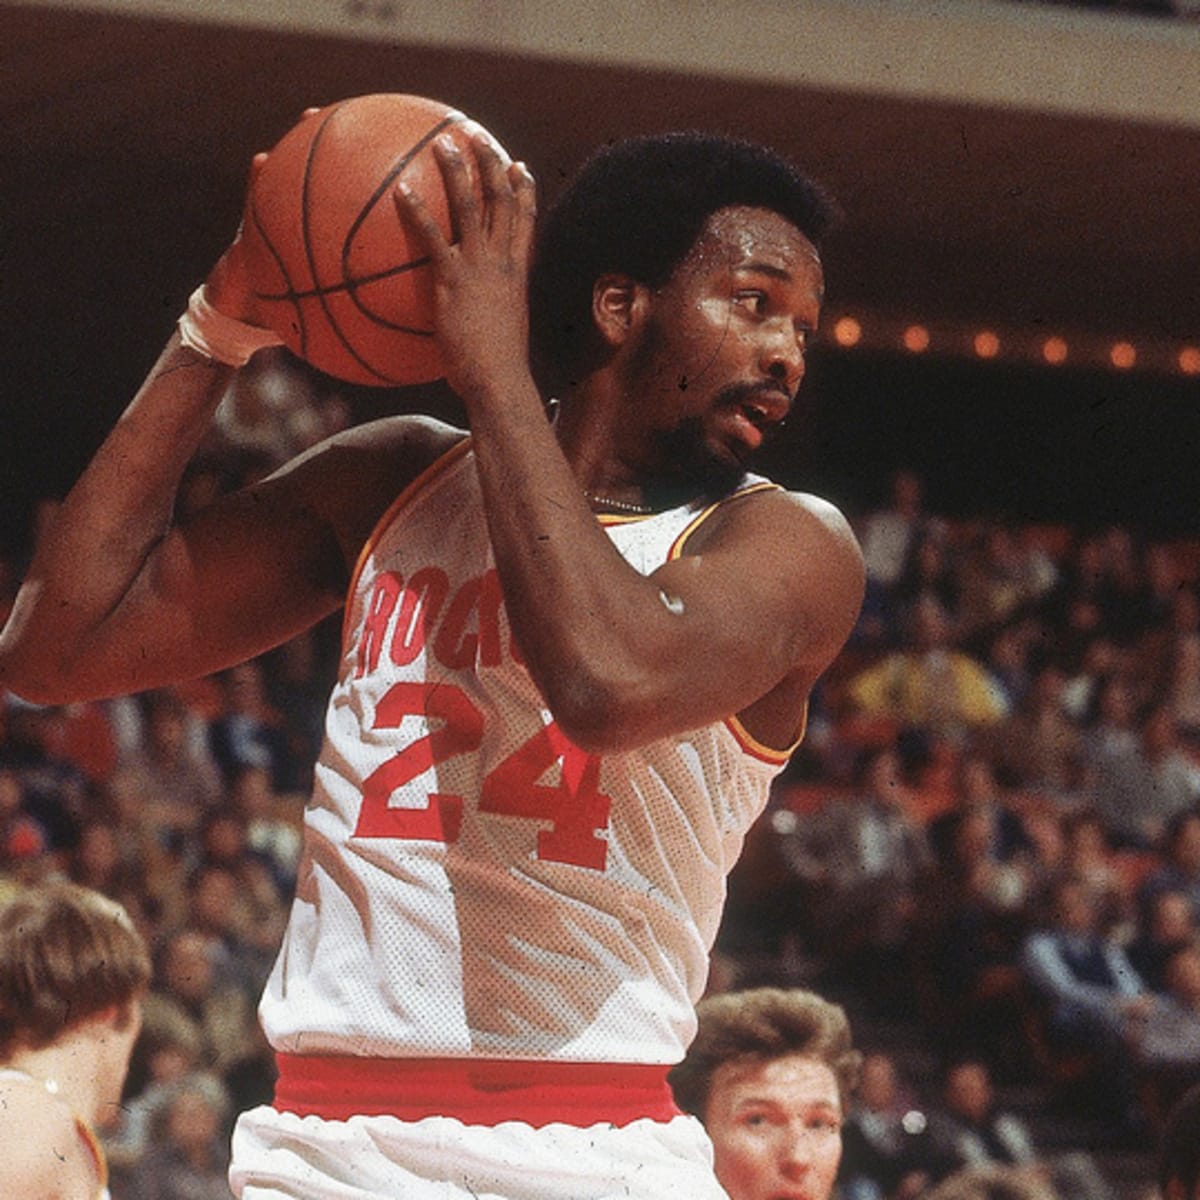 Time to single them out: Moses Malone used to be the best NBA